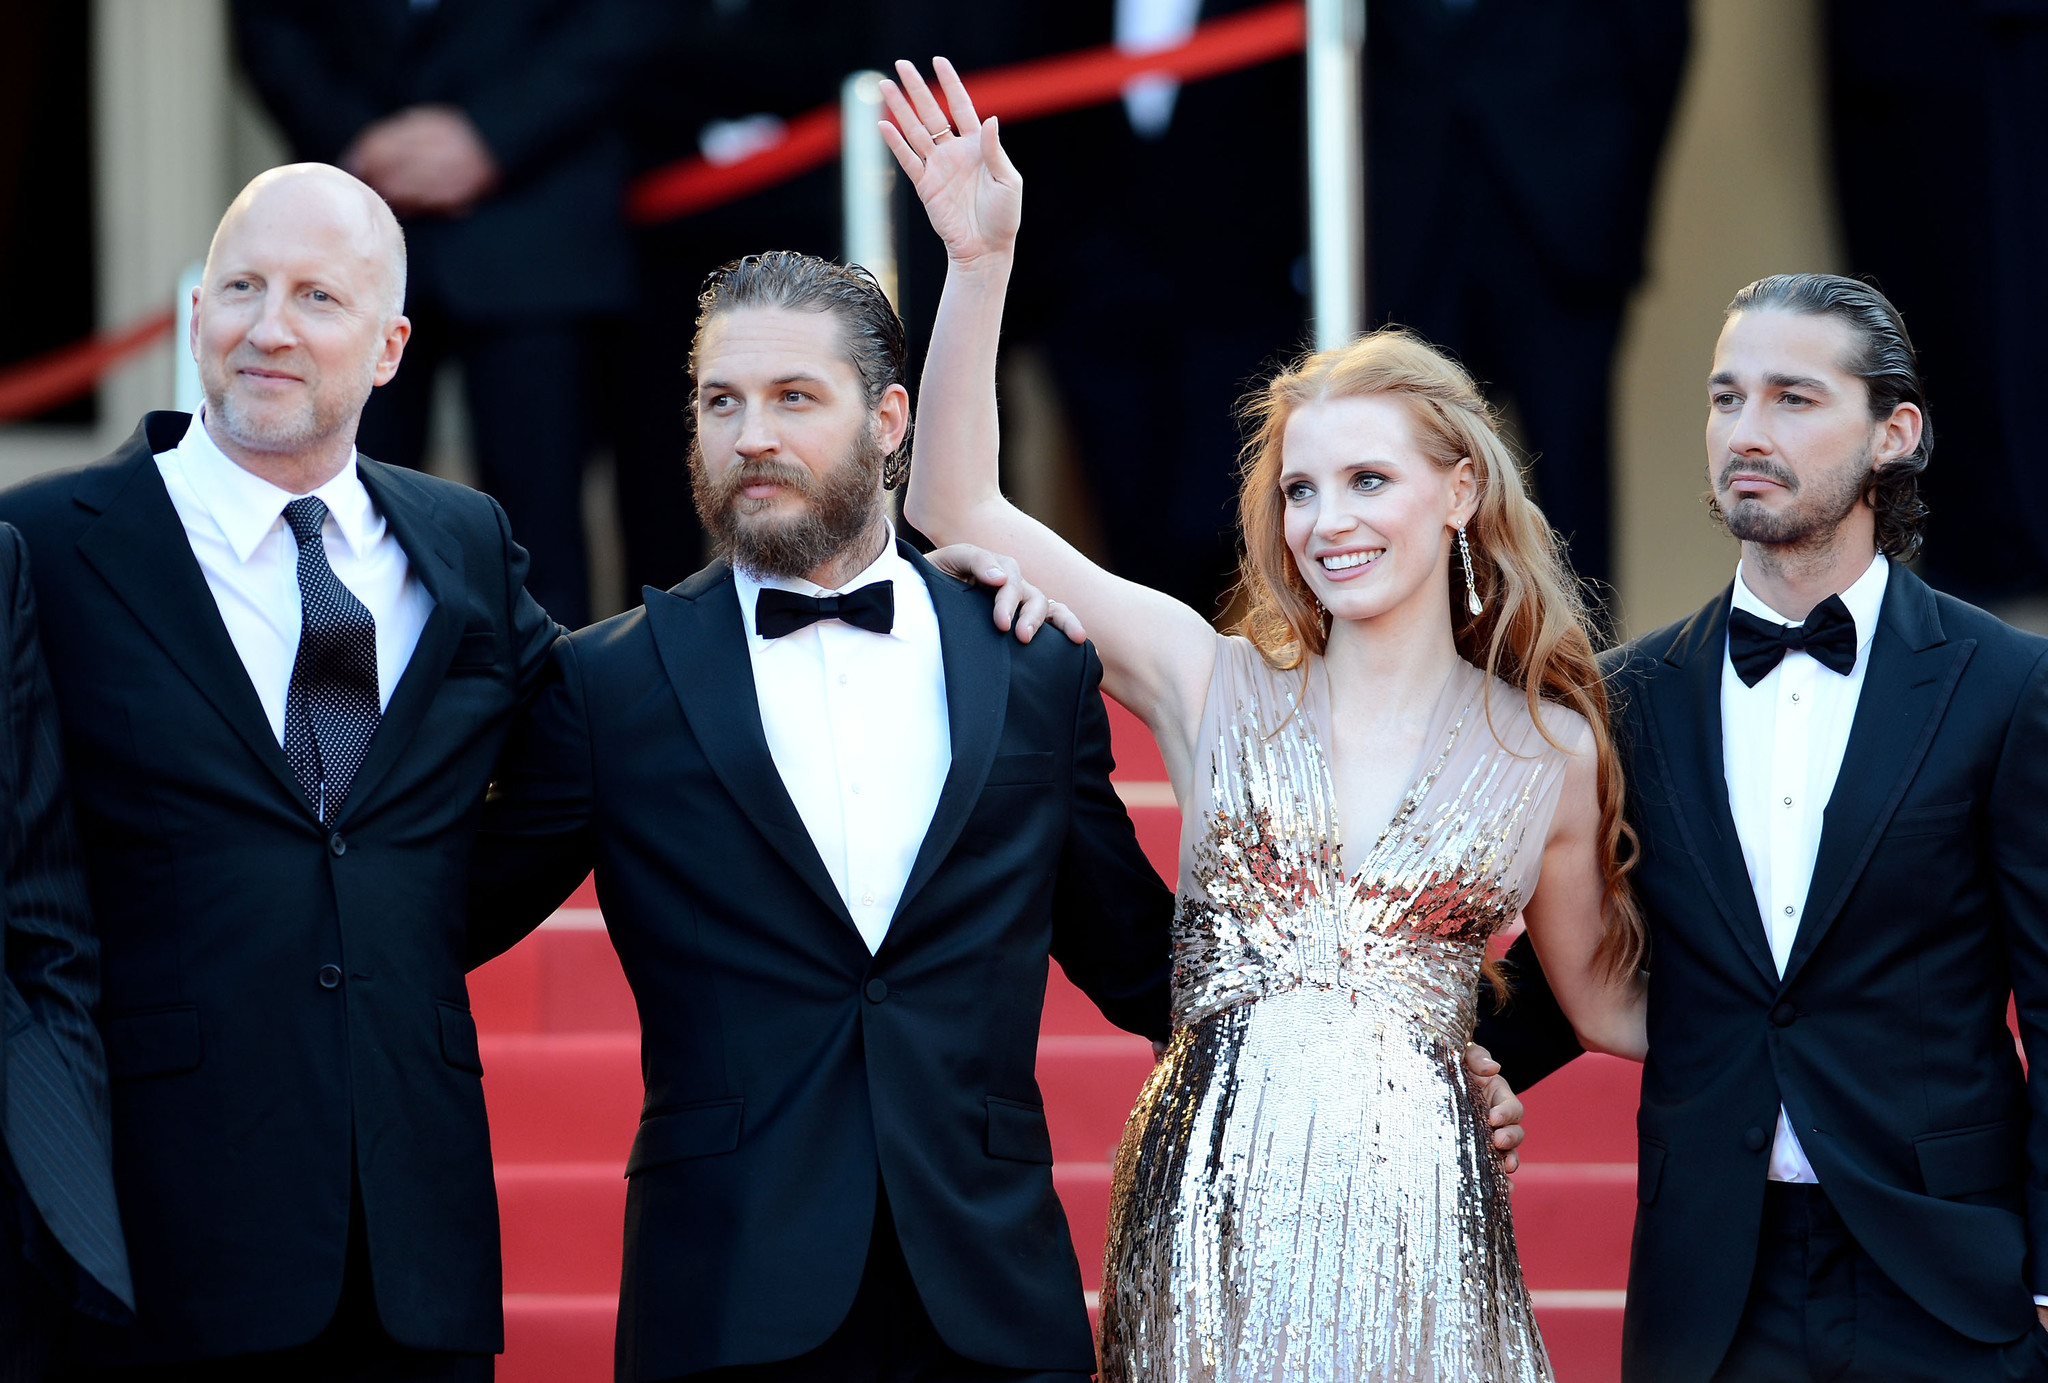 Tom Hardy, John Hillcoat, Shia LaBeouf and Jessica Chastain at event of Virs istatymo (2012)